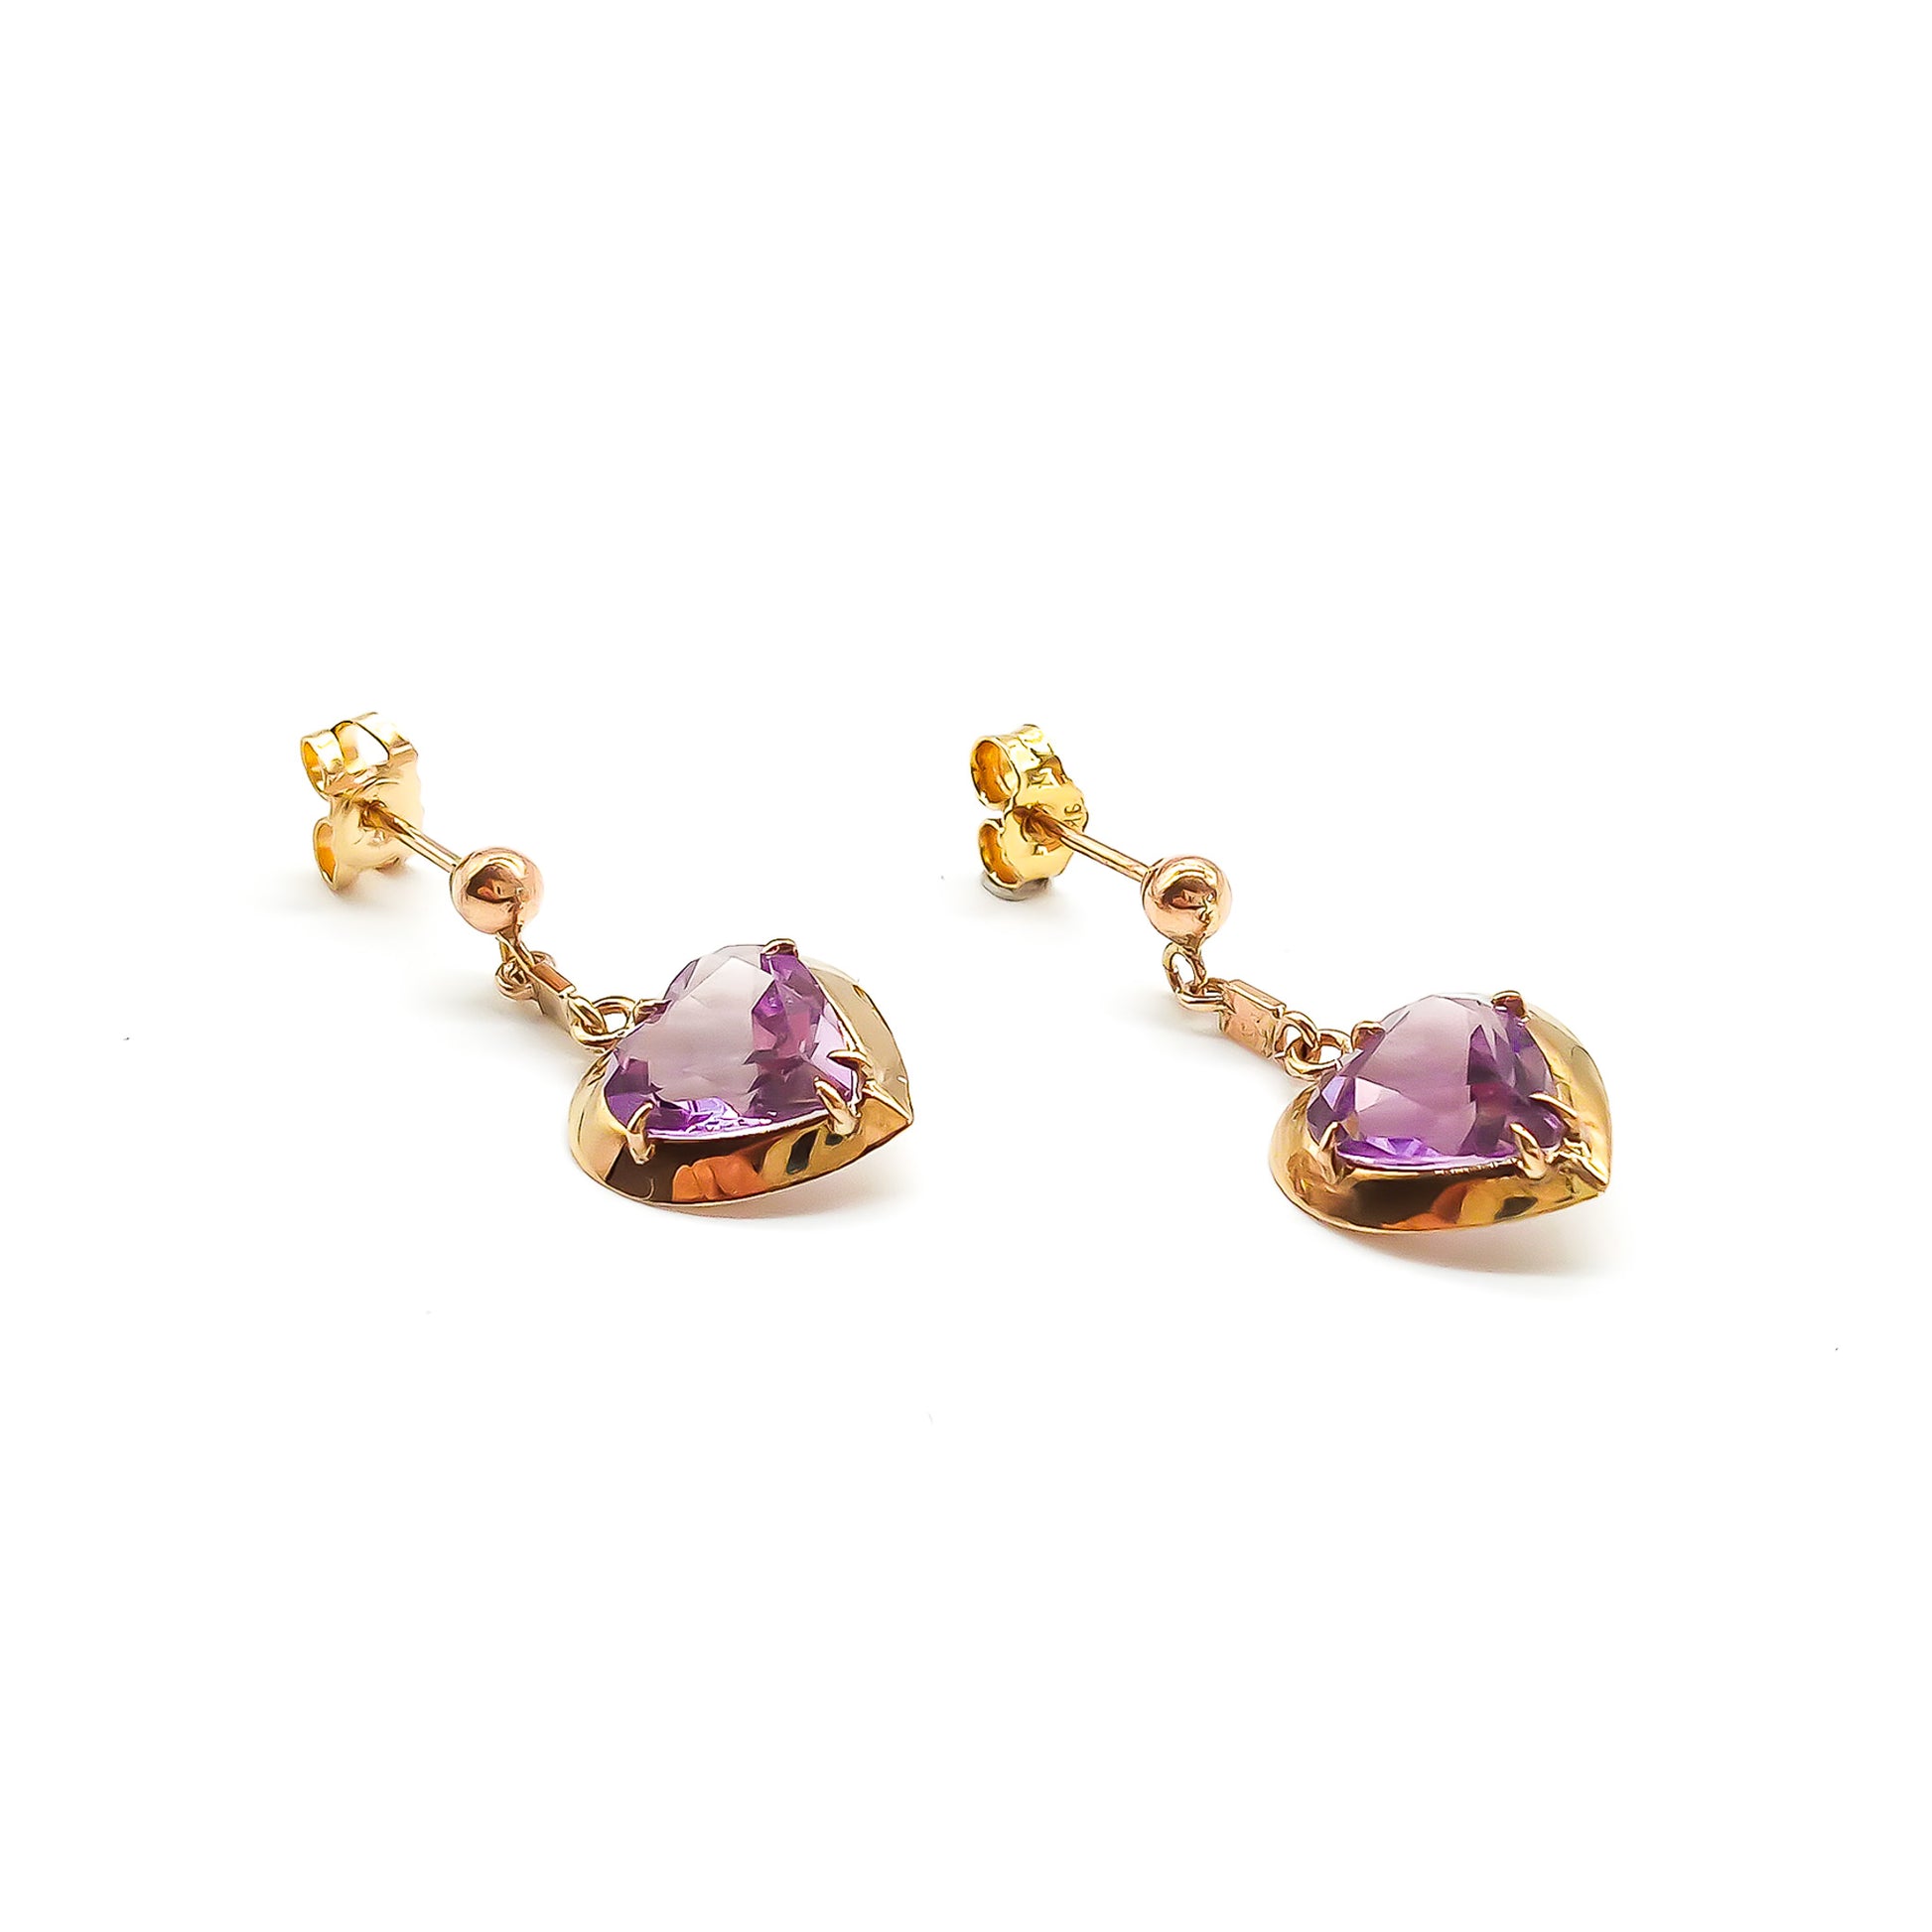 Pretty 9ct rose gold earrings set with heart-shaped faceted amethyst drops.